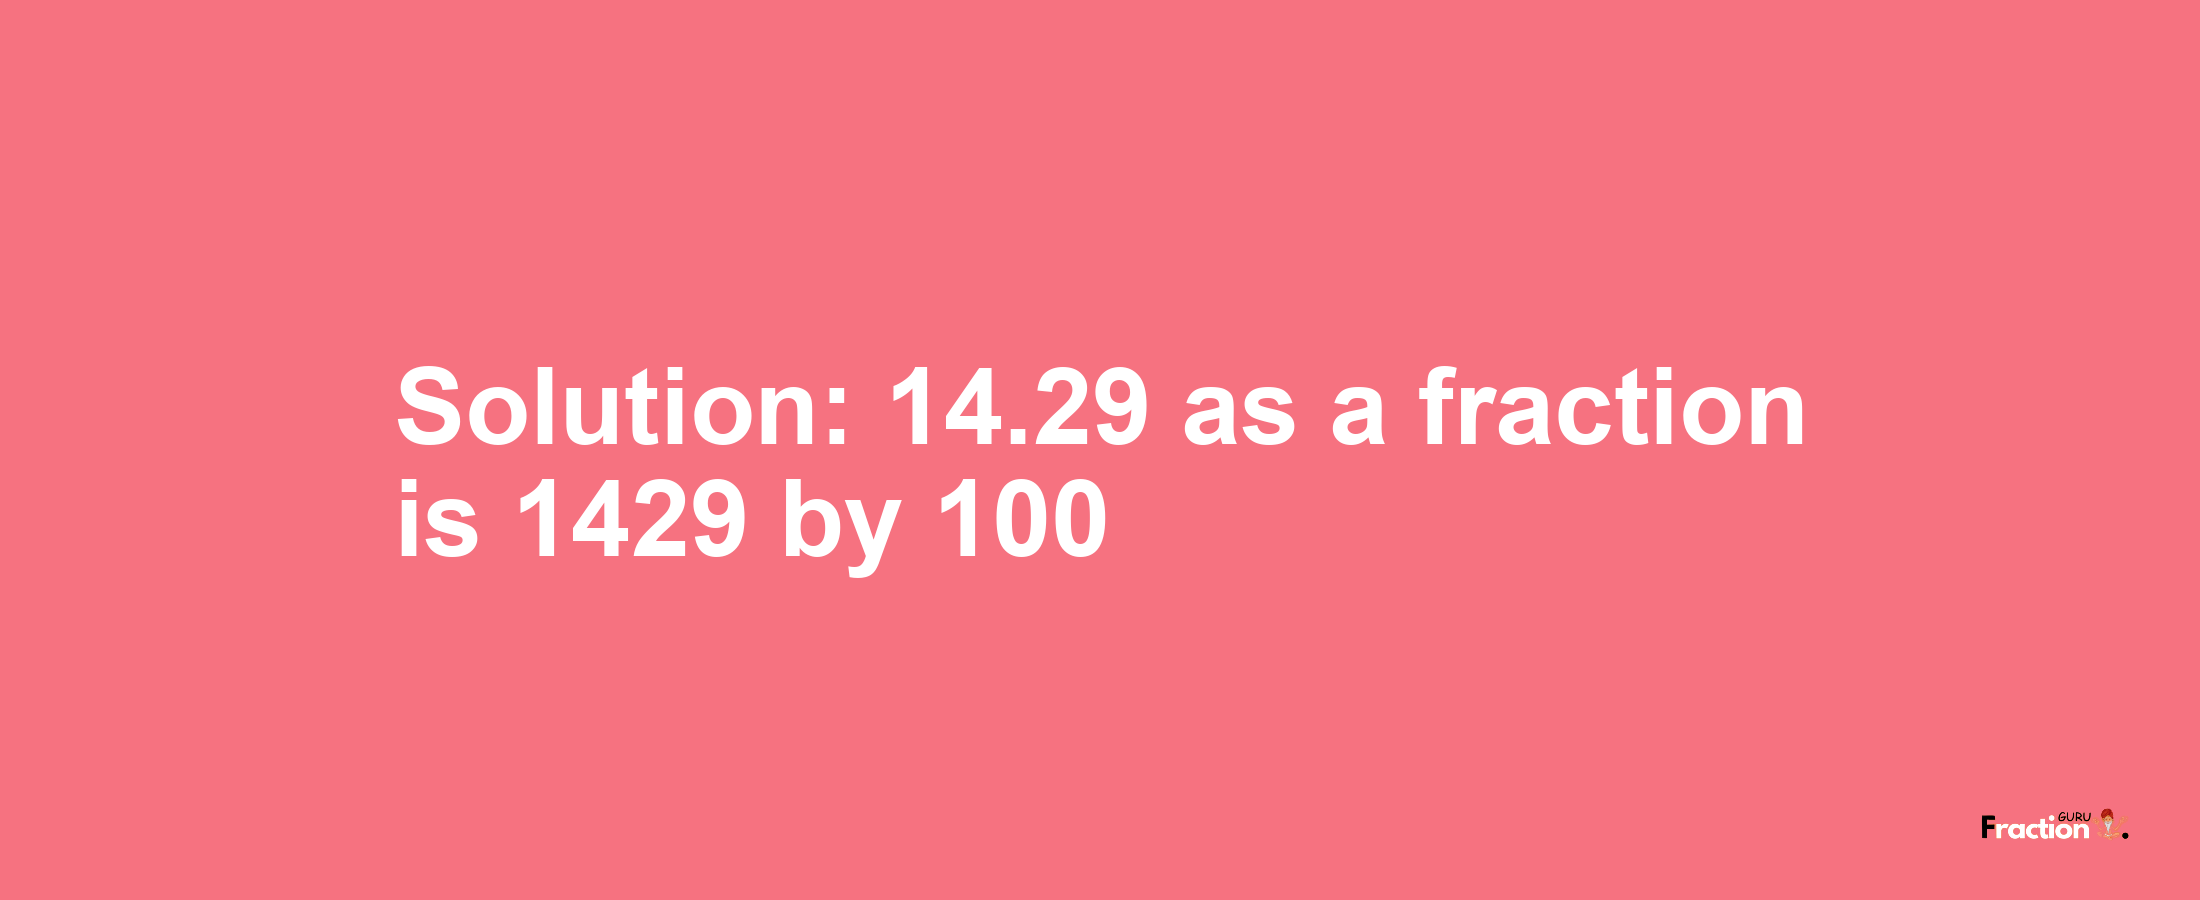 Solution:14.29 as a fraction is 1429/100